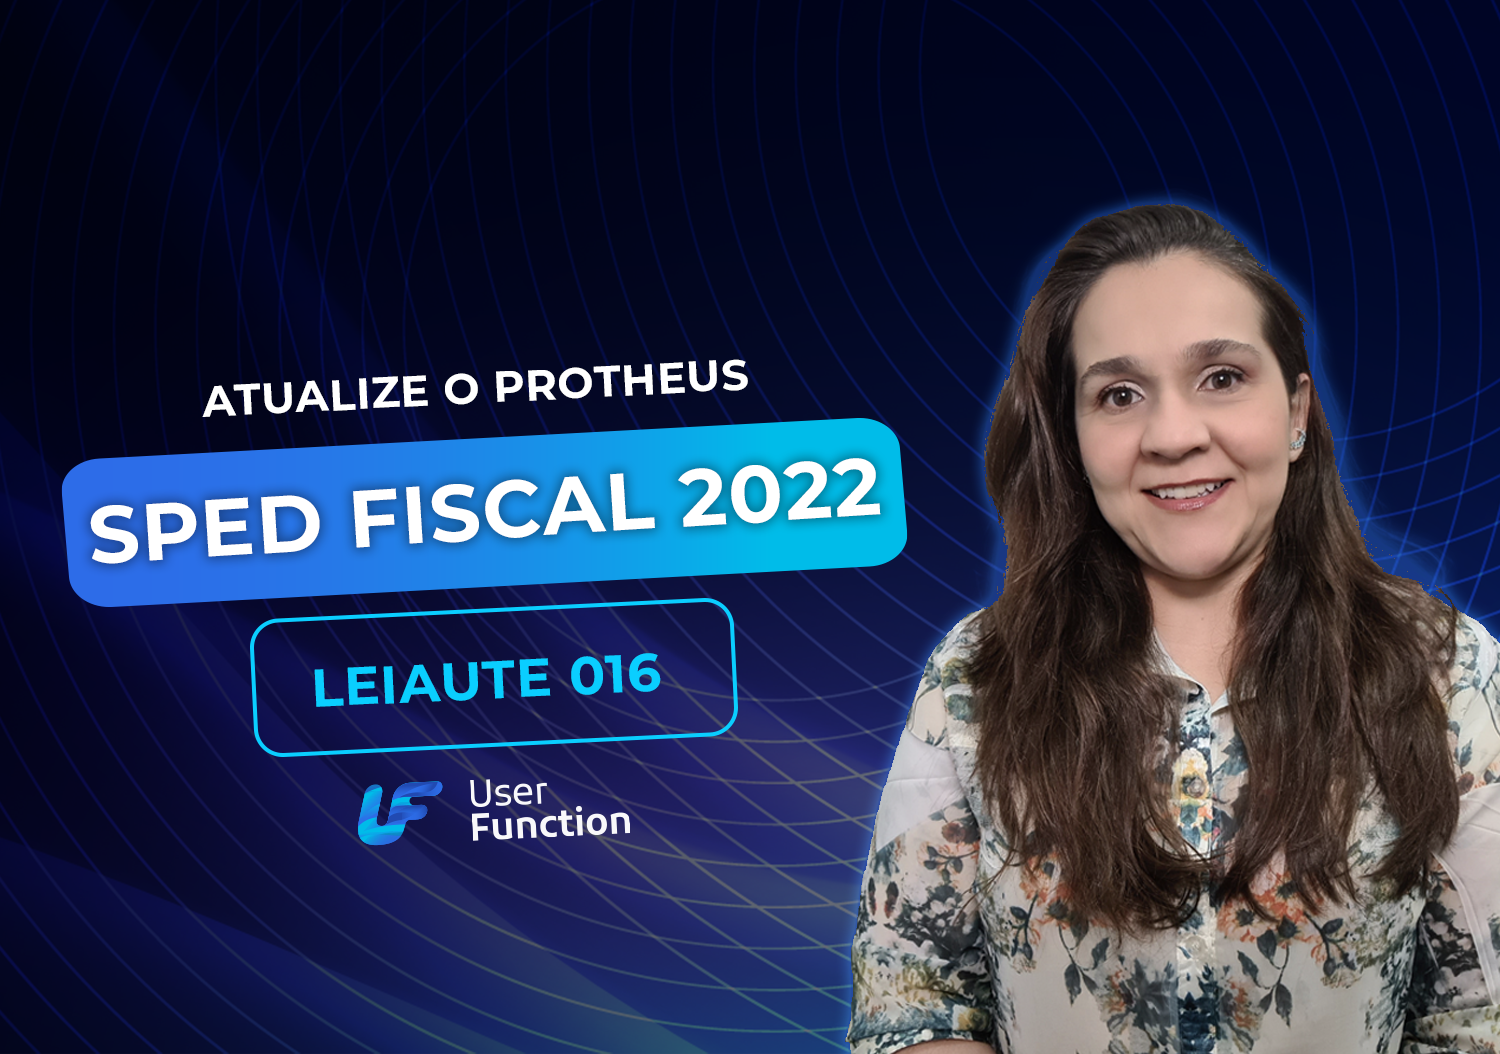 Sped Fiscal 2022 leiaute 016